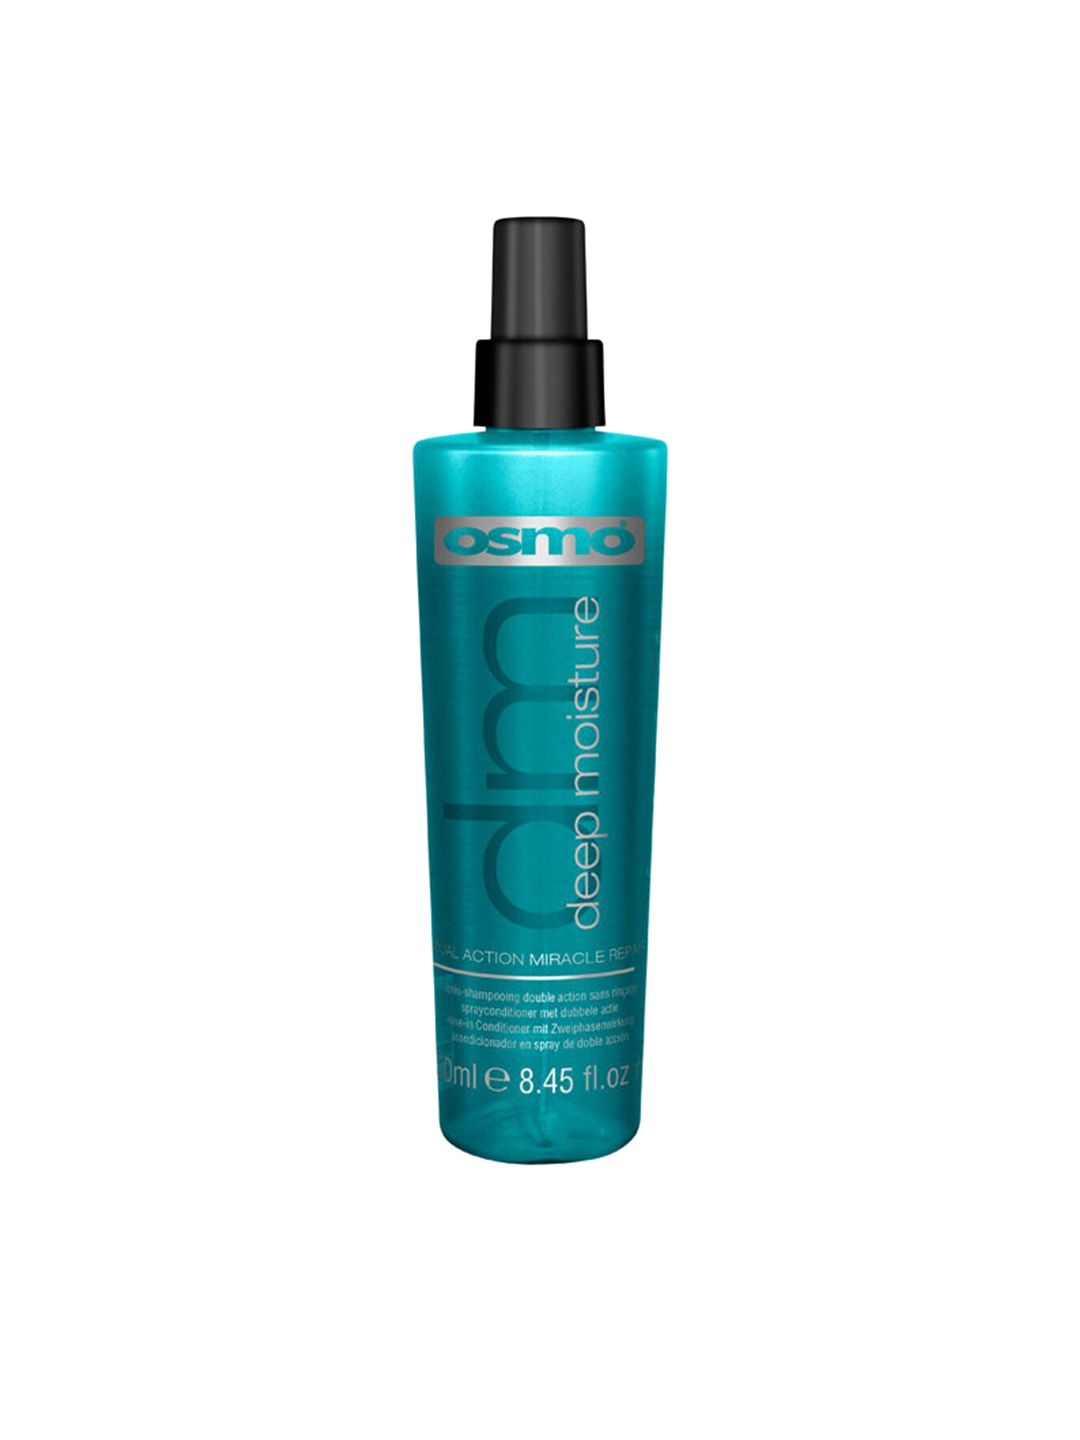 osmo Deep Moisture Dual Action Miracle Repair Hair Spray - 250ml Price in India